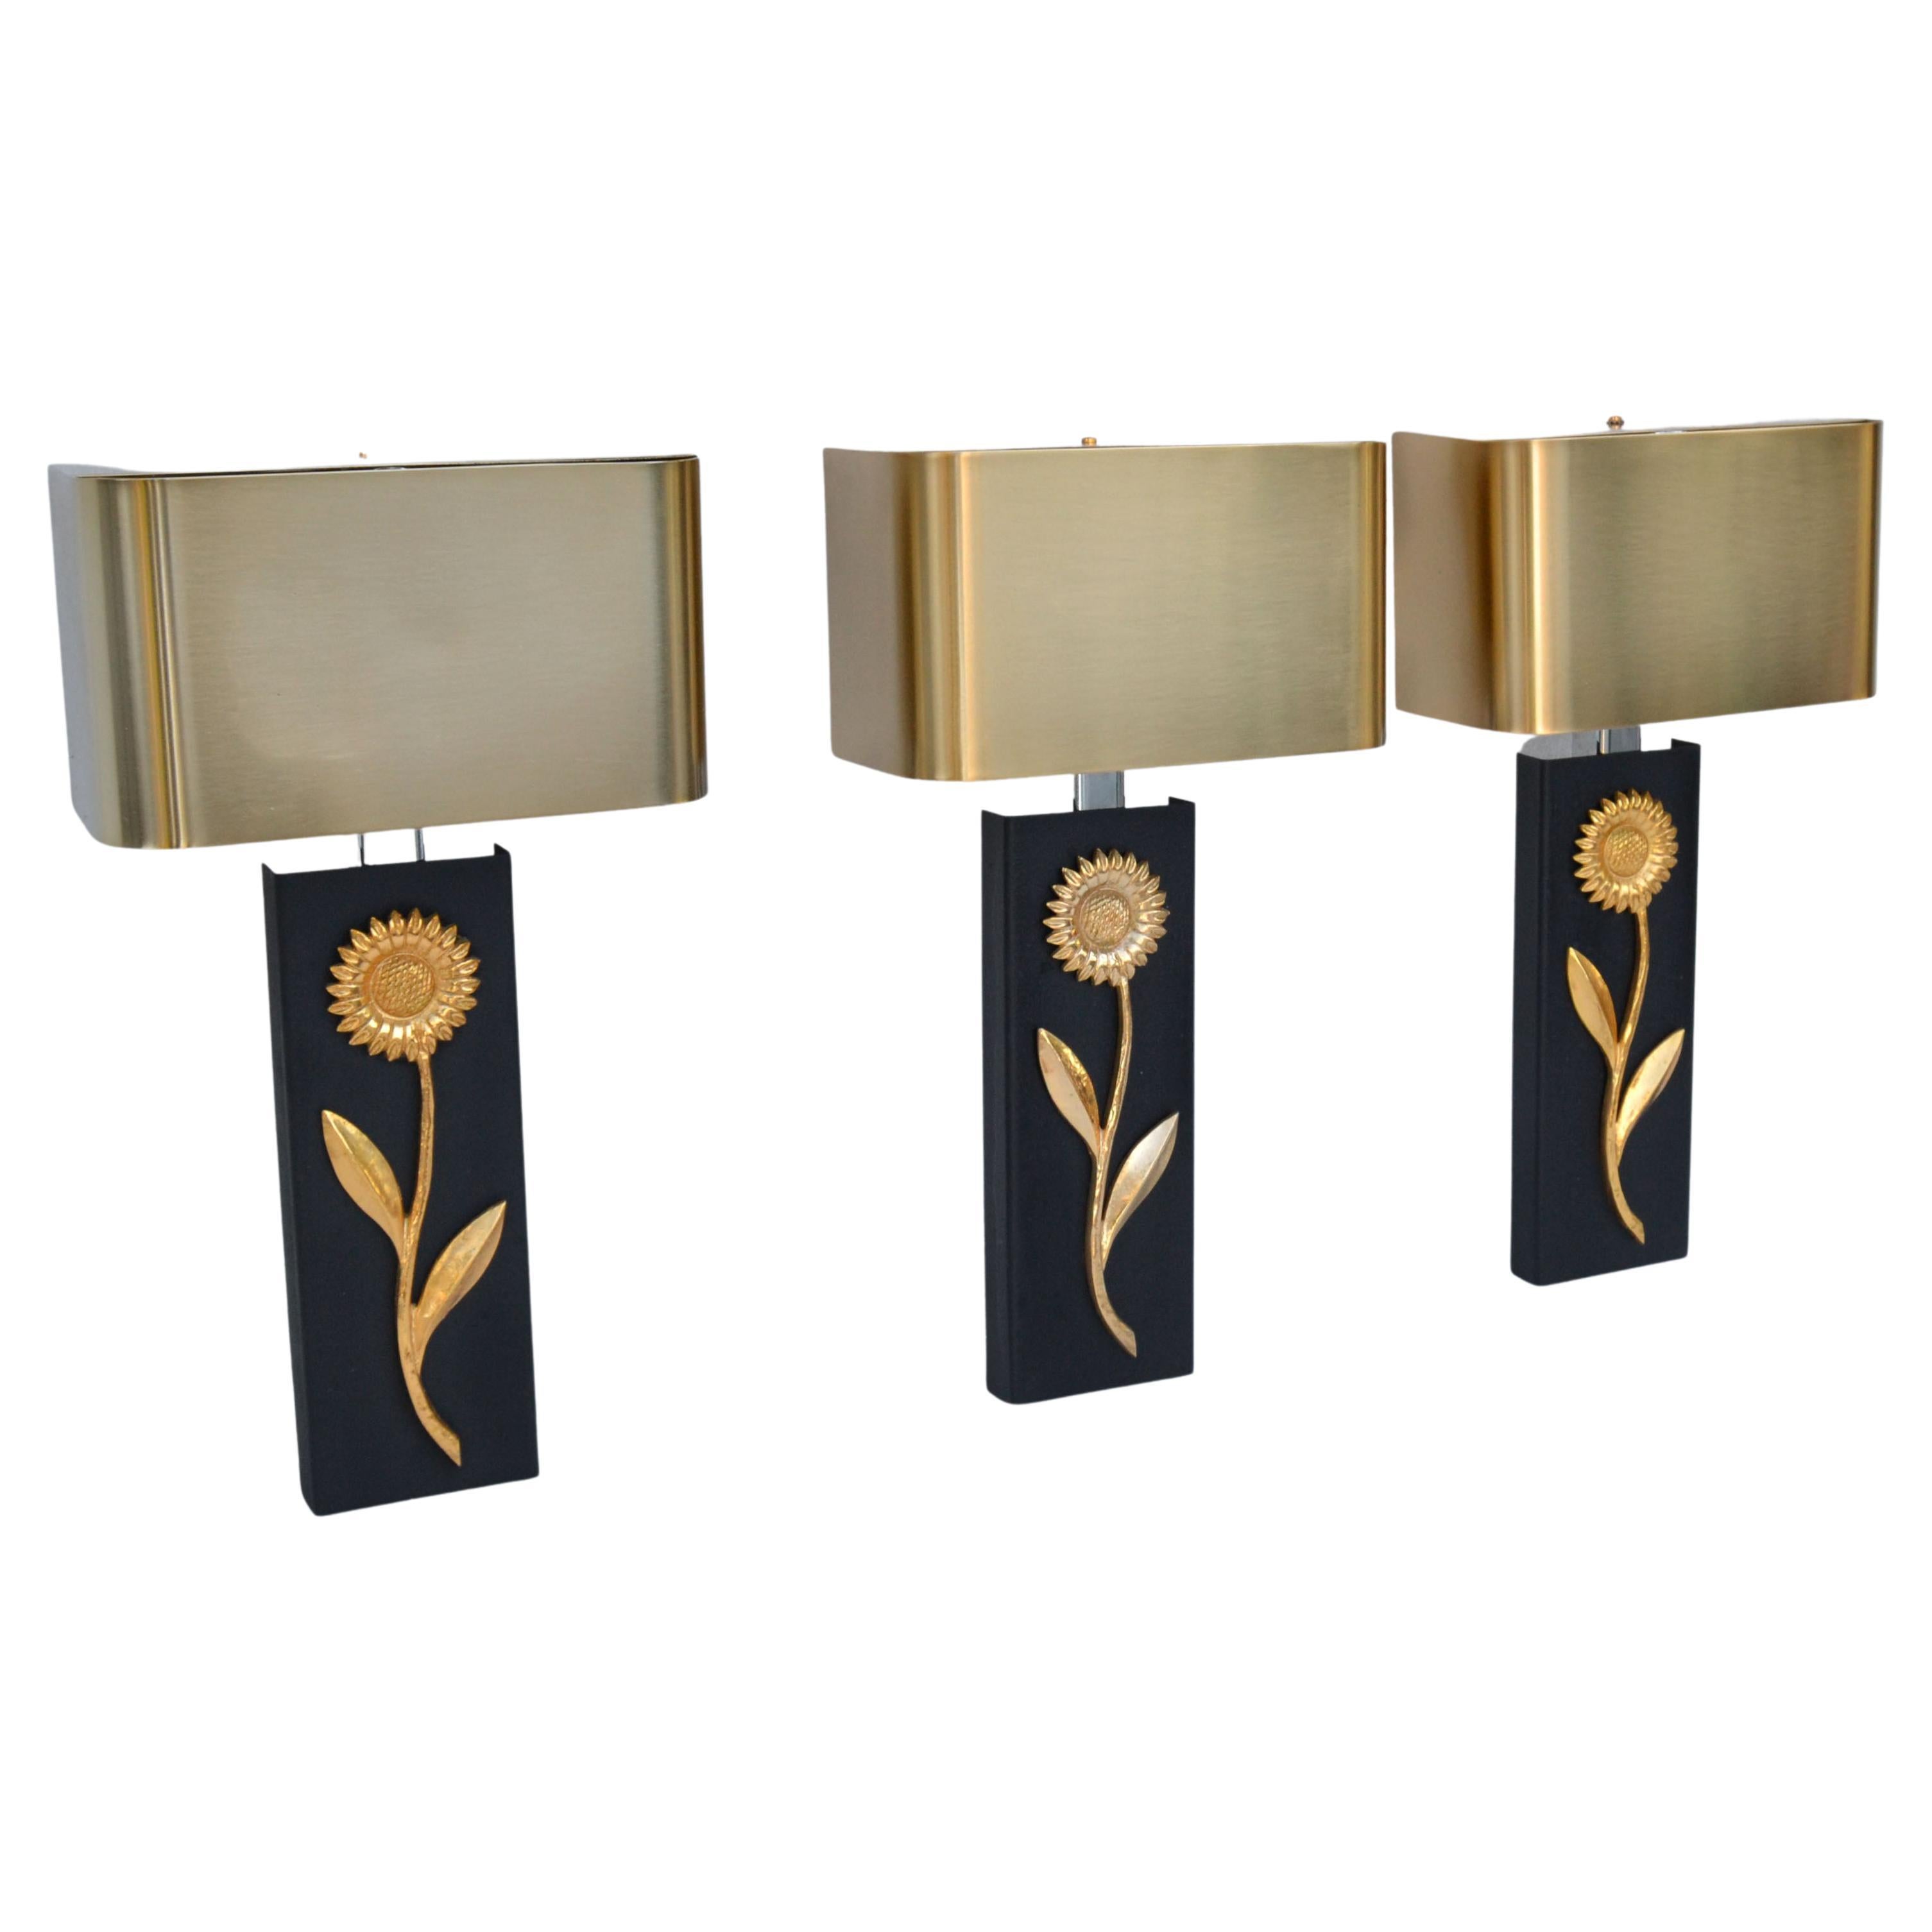 3 Maison Charles Bronze, Brass & Steel Sconces, Wall Lights Brushed Brass Shades